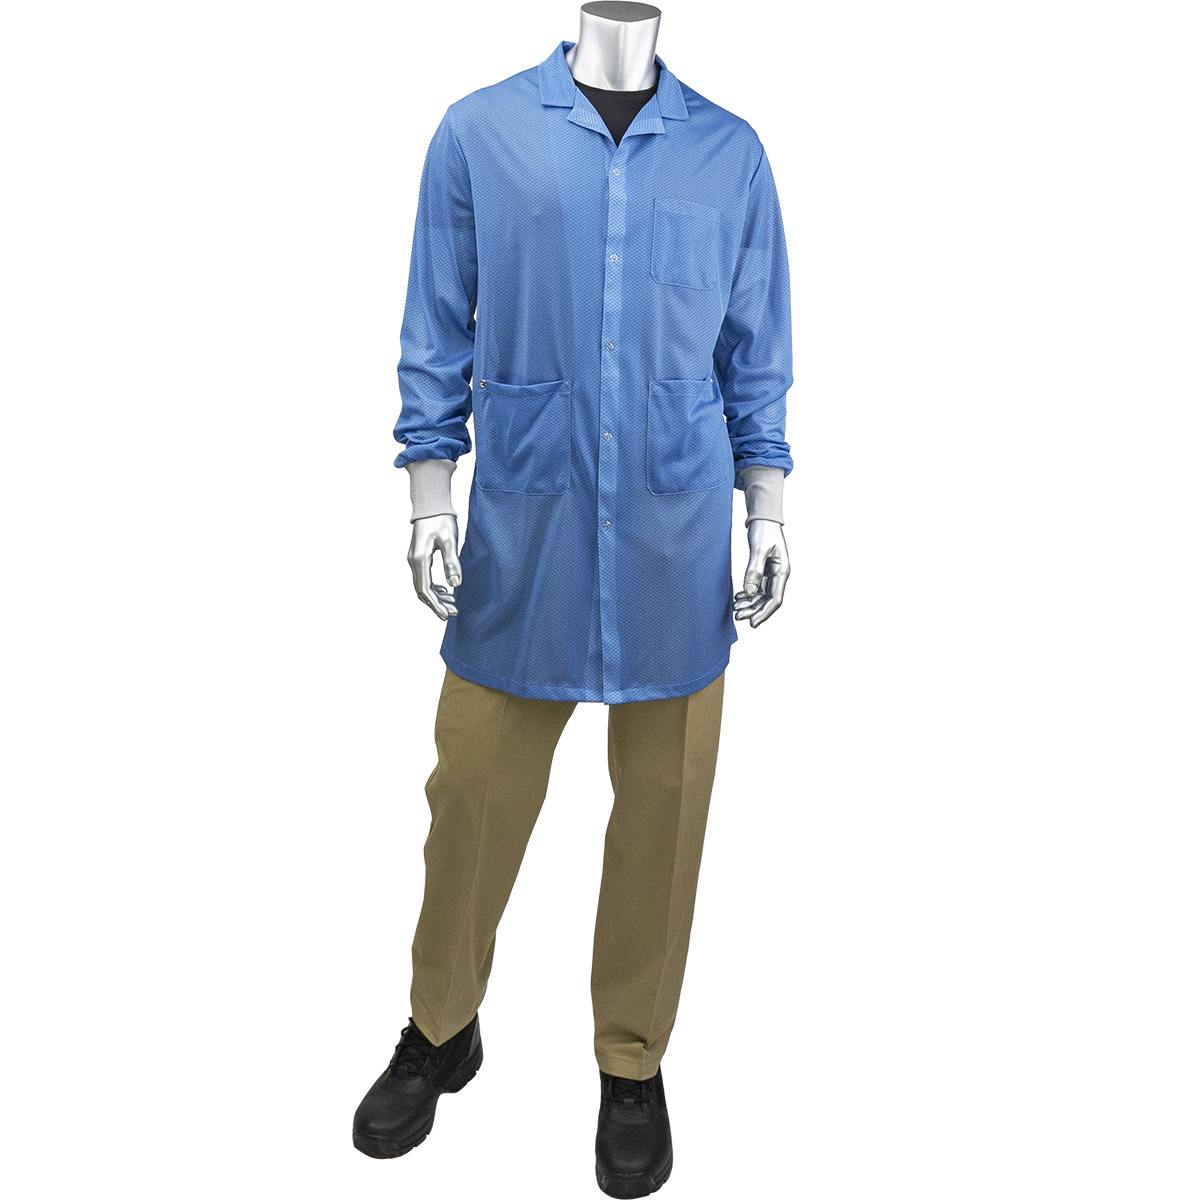 Long ESD Sheer Labcoat - ESD Knit Cuff, Blue (BR6C-42NB)